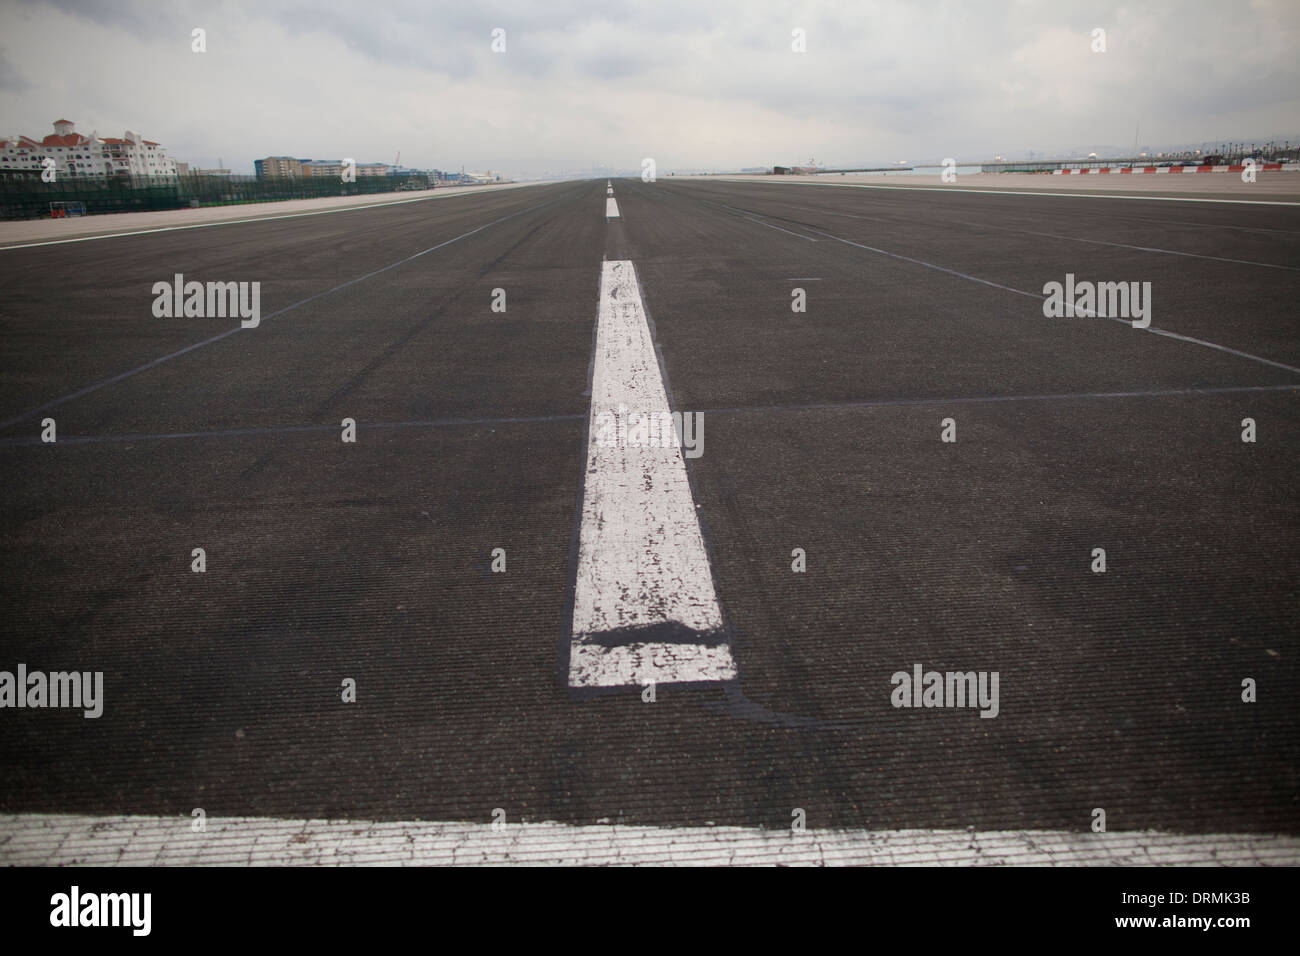 The main runway on Gibraltar which divides the UK territory and La Linea de la Concepcion, Spain Stock Photo